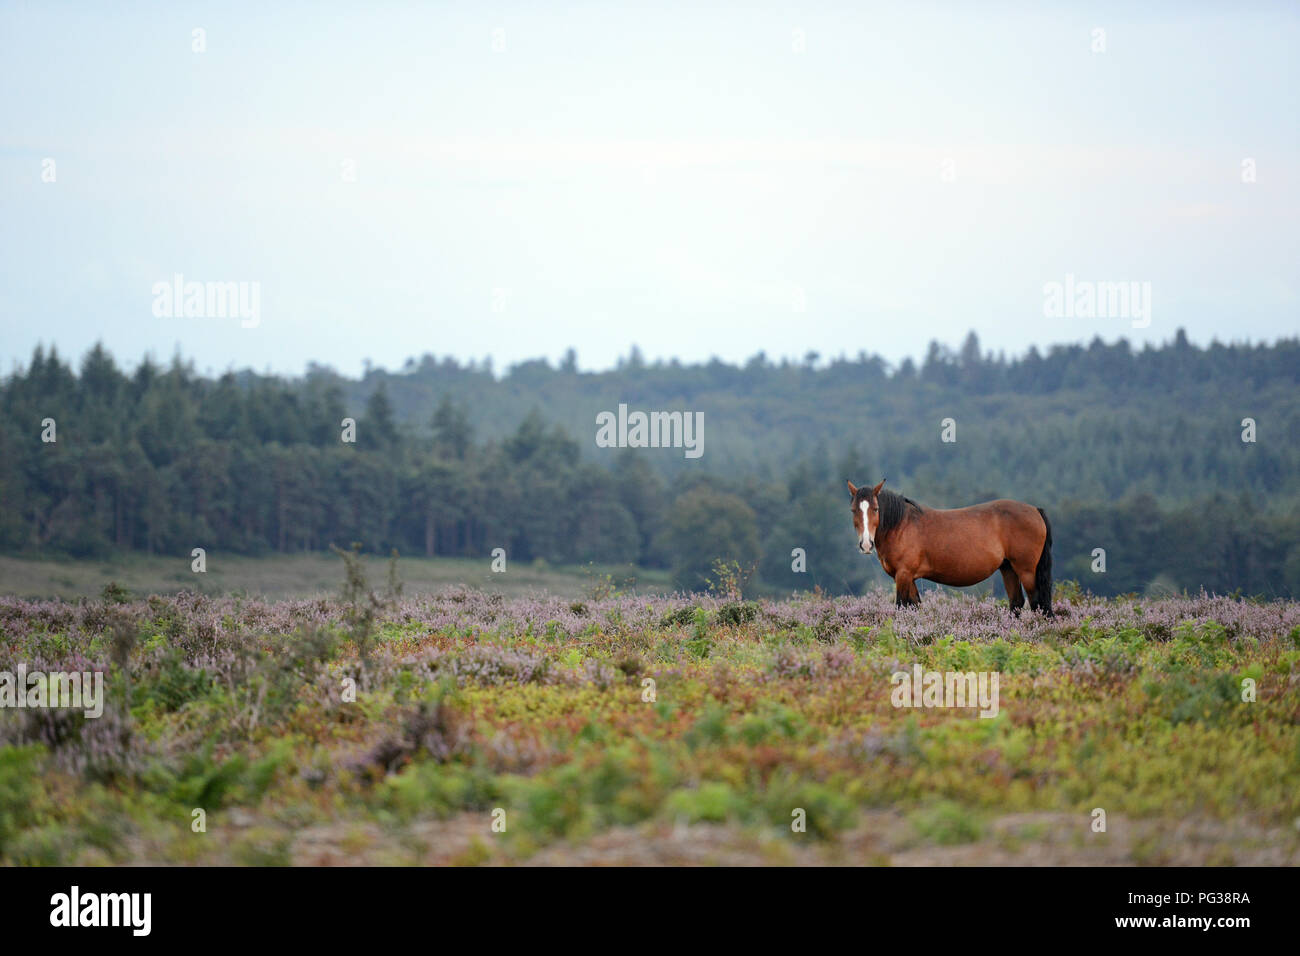 New Forest Hampshire, UK. 23rd Aug, 2018. Pictured: A New Forest pony wanders through heather on heath land at dusk near Stoney Cross in the New Forest, Hampshire, UK. Credit: Henry Stephens/Alamy Live News Stock Photo